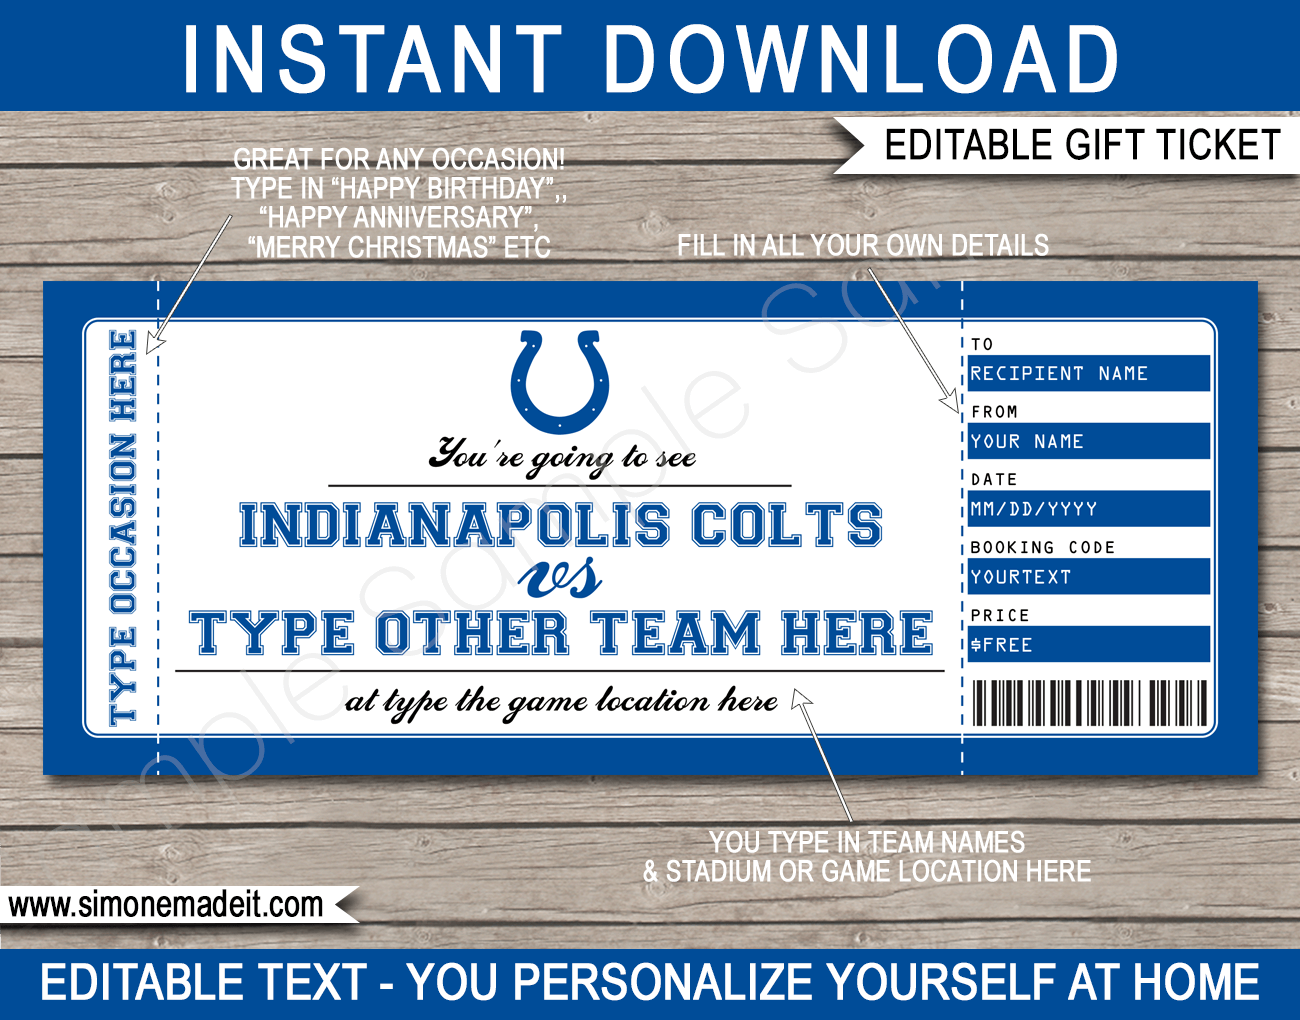 Indianapolis Colts Game Ticket Gift Voucher